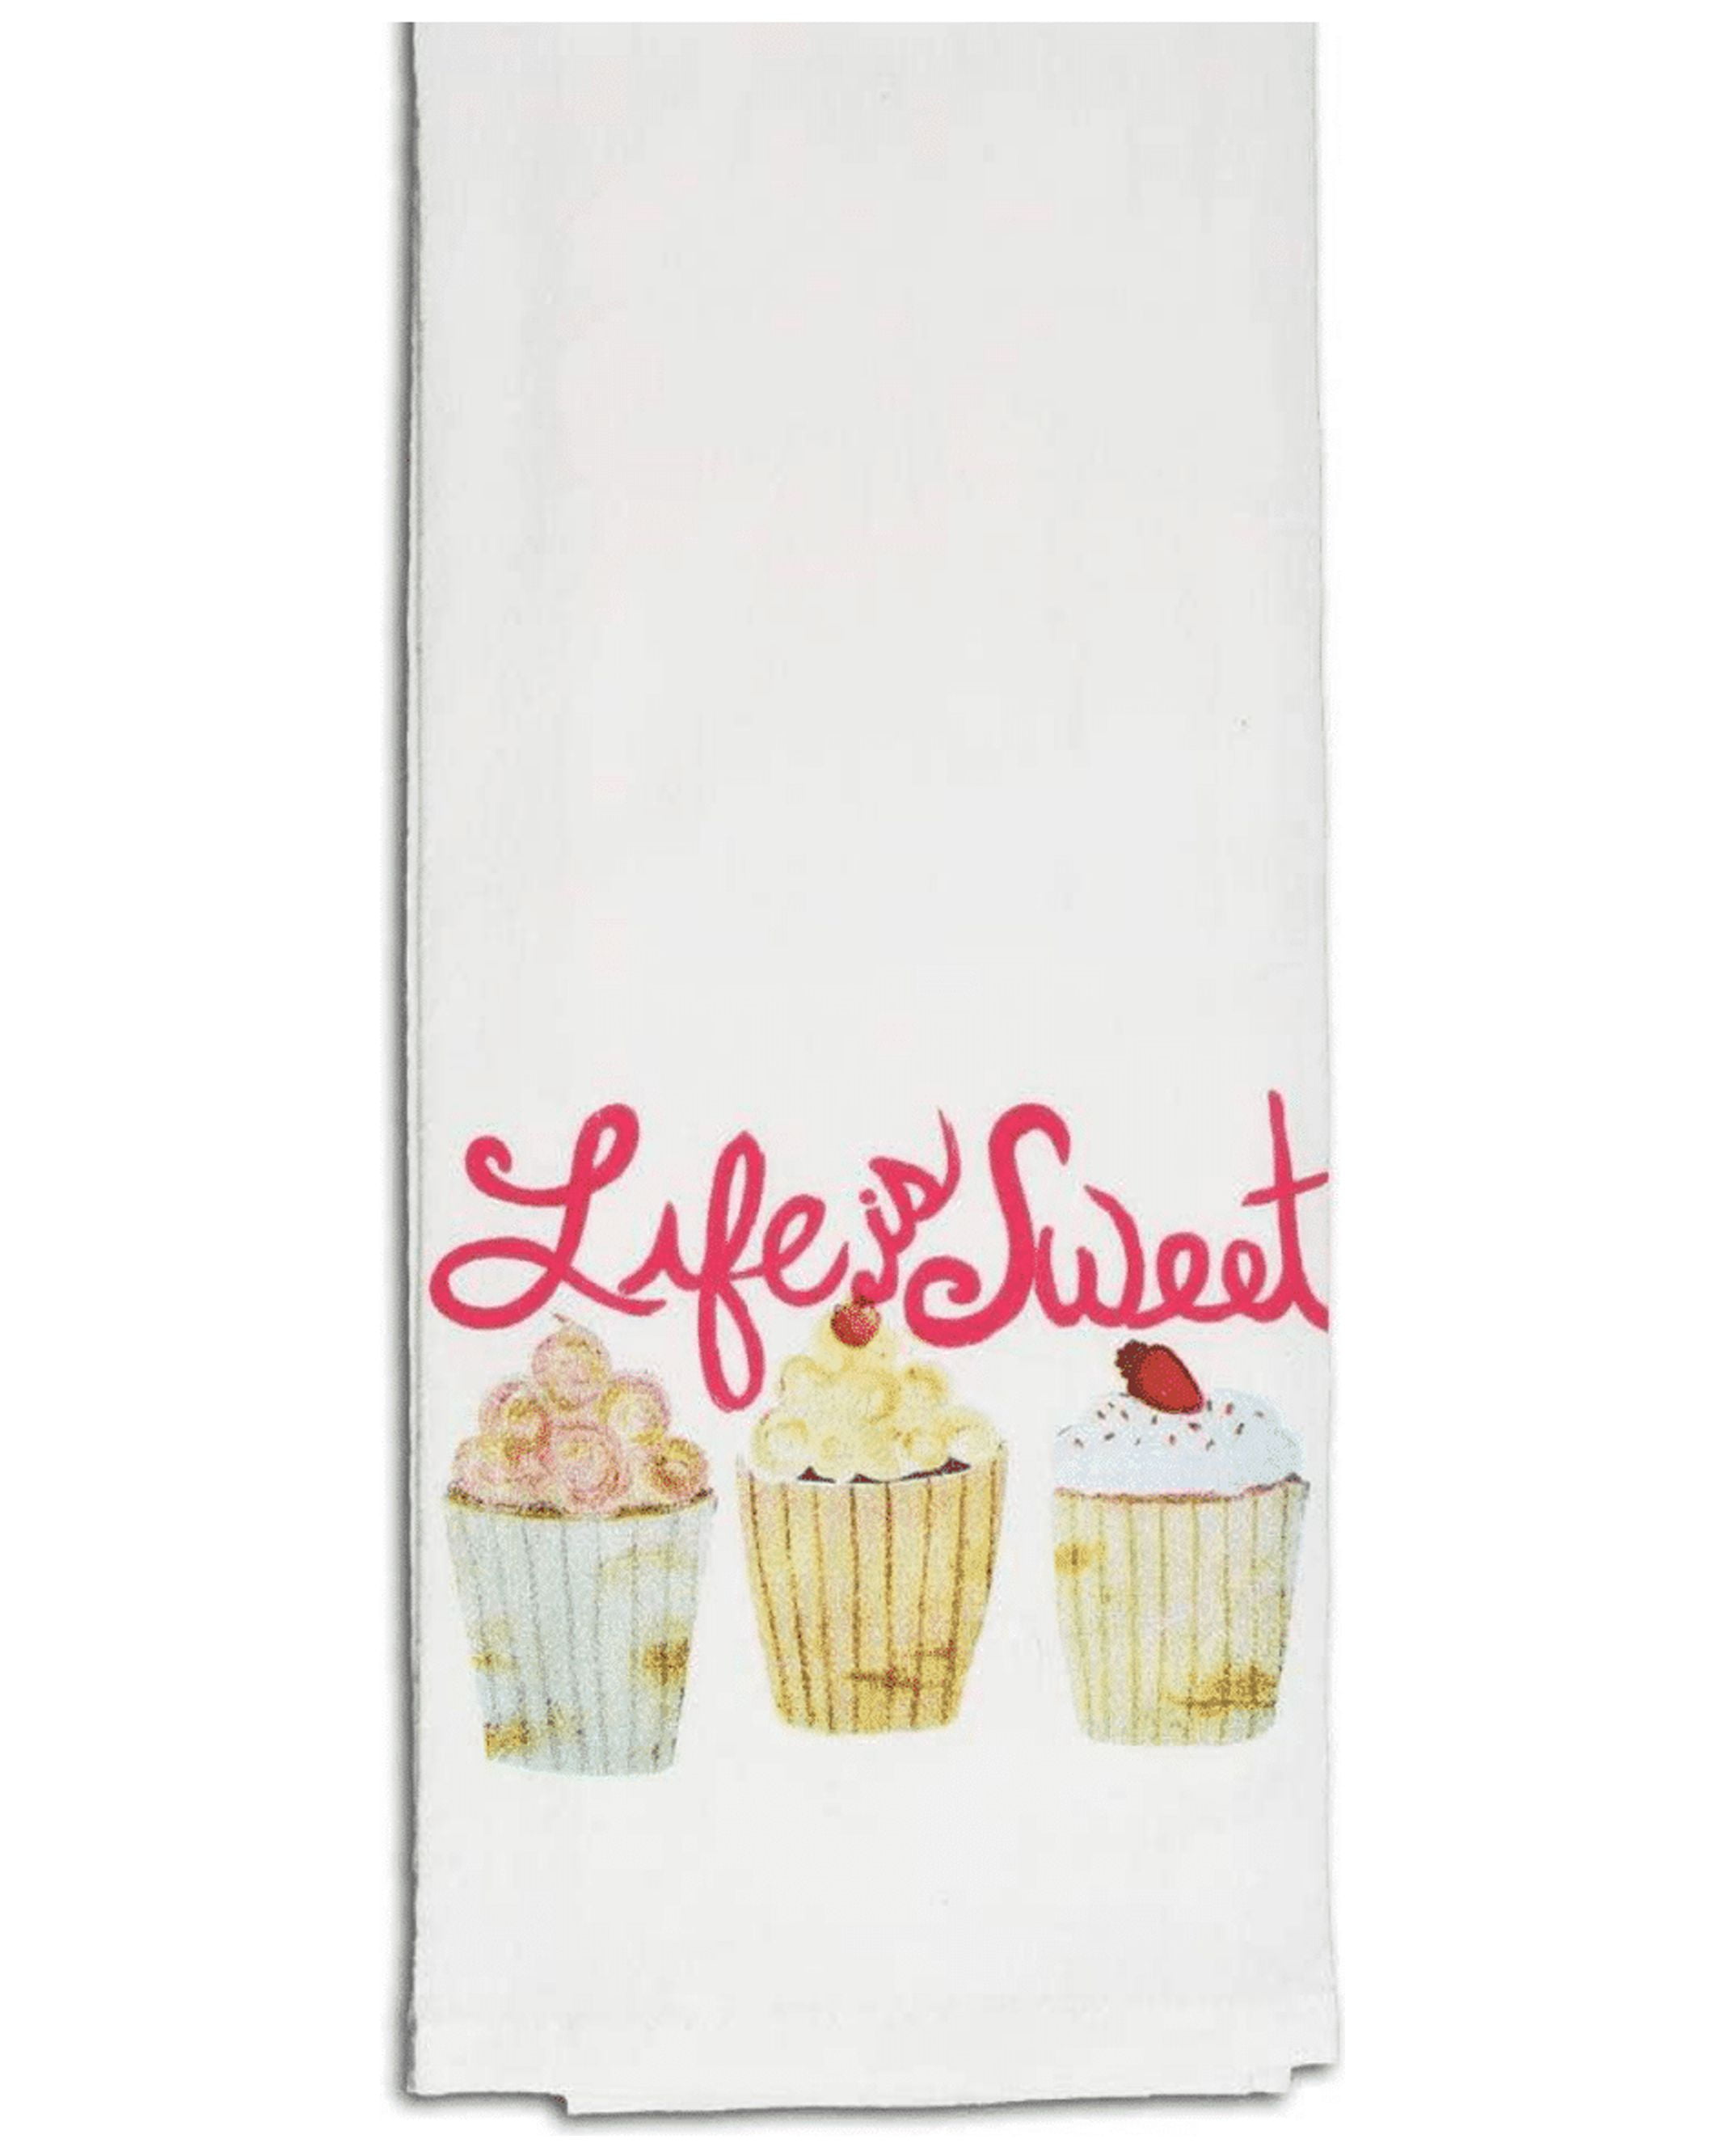  fillURbasket Cute Kitchen Towels Set, Fun Dish Towels with  Sayings Faith, Blessed, Family, Love, Home & Dreams Theme, 5 Flour Sack  Towels for Dish Drying Decor 16x28 Cotton : Home 